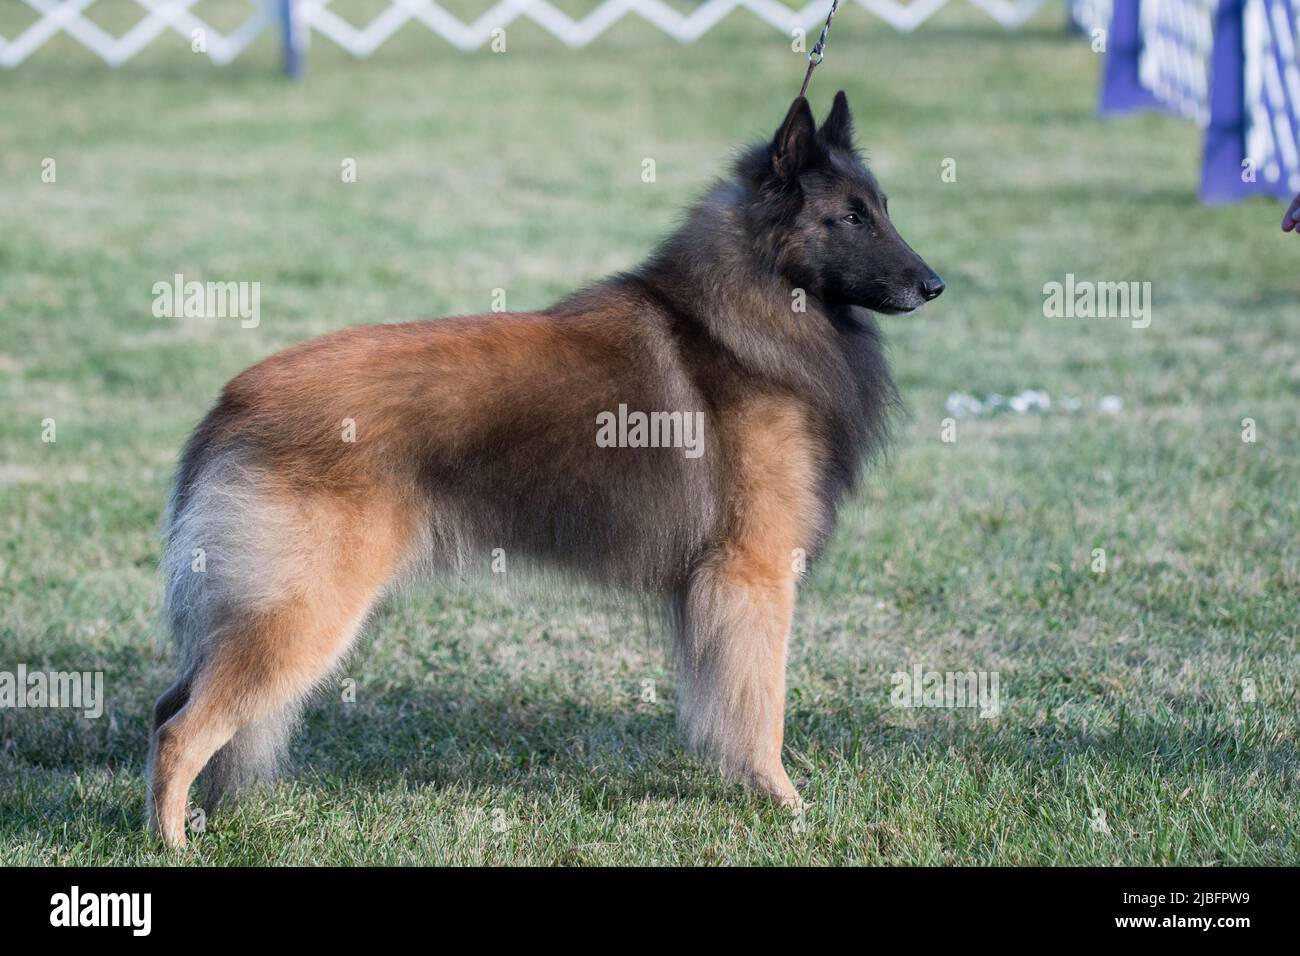 Belgian Tervuren standing in profile view on a grass field Stock Photo